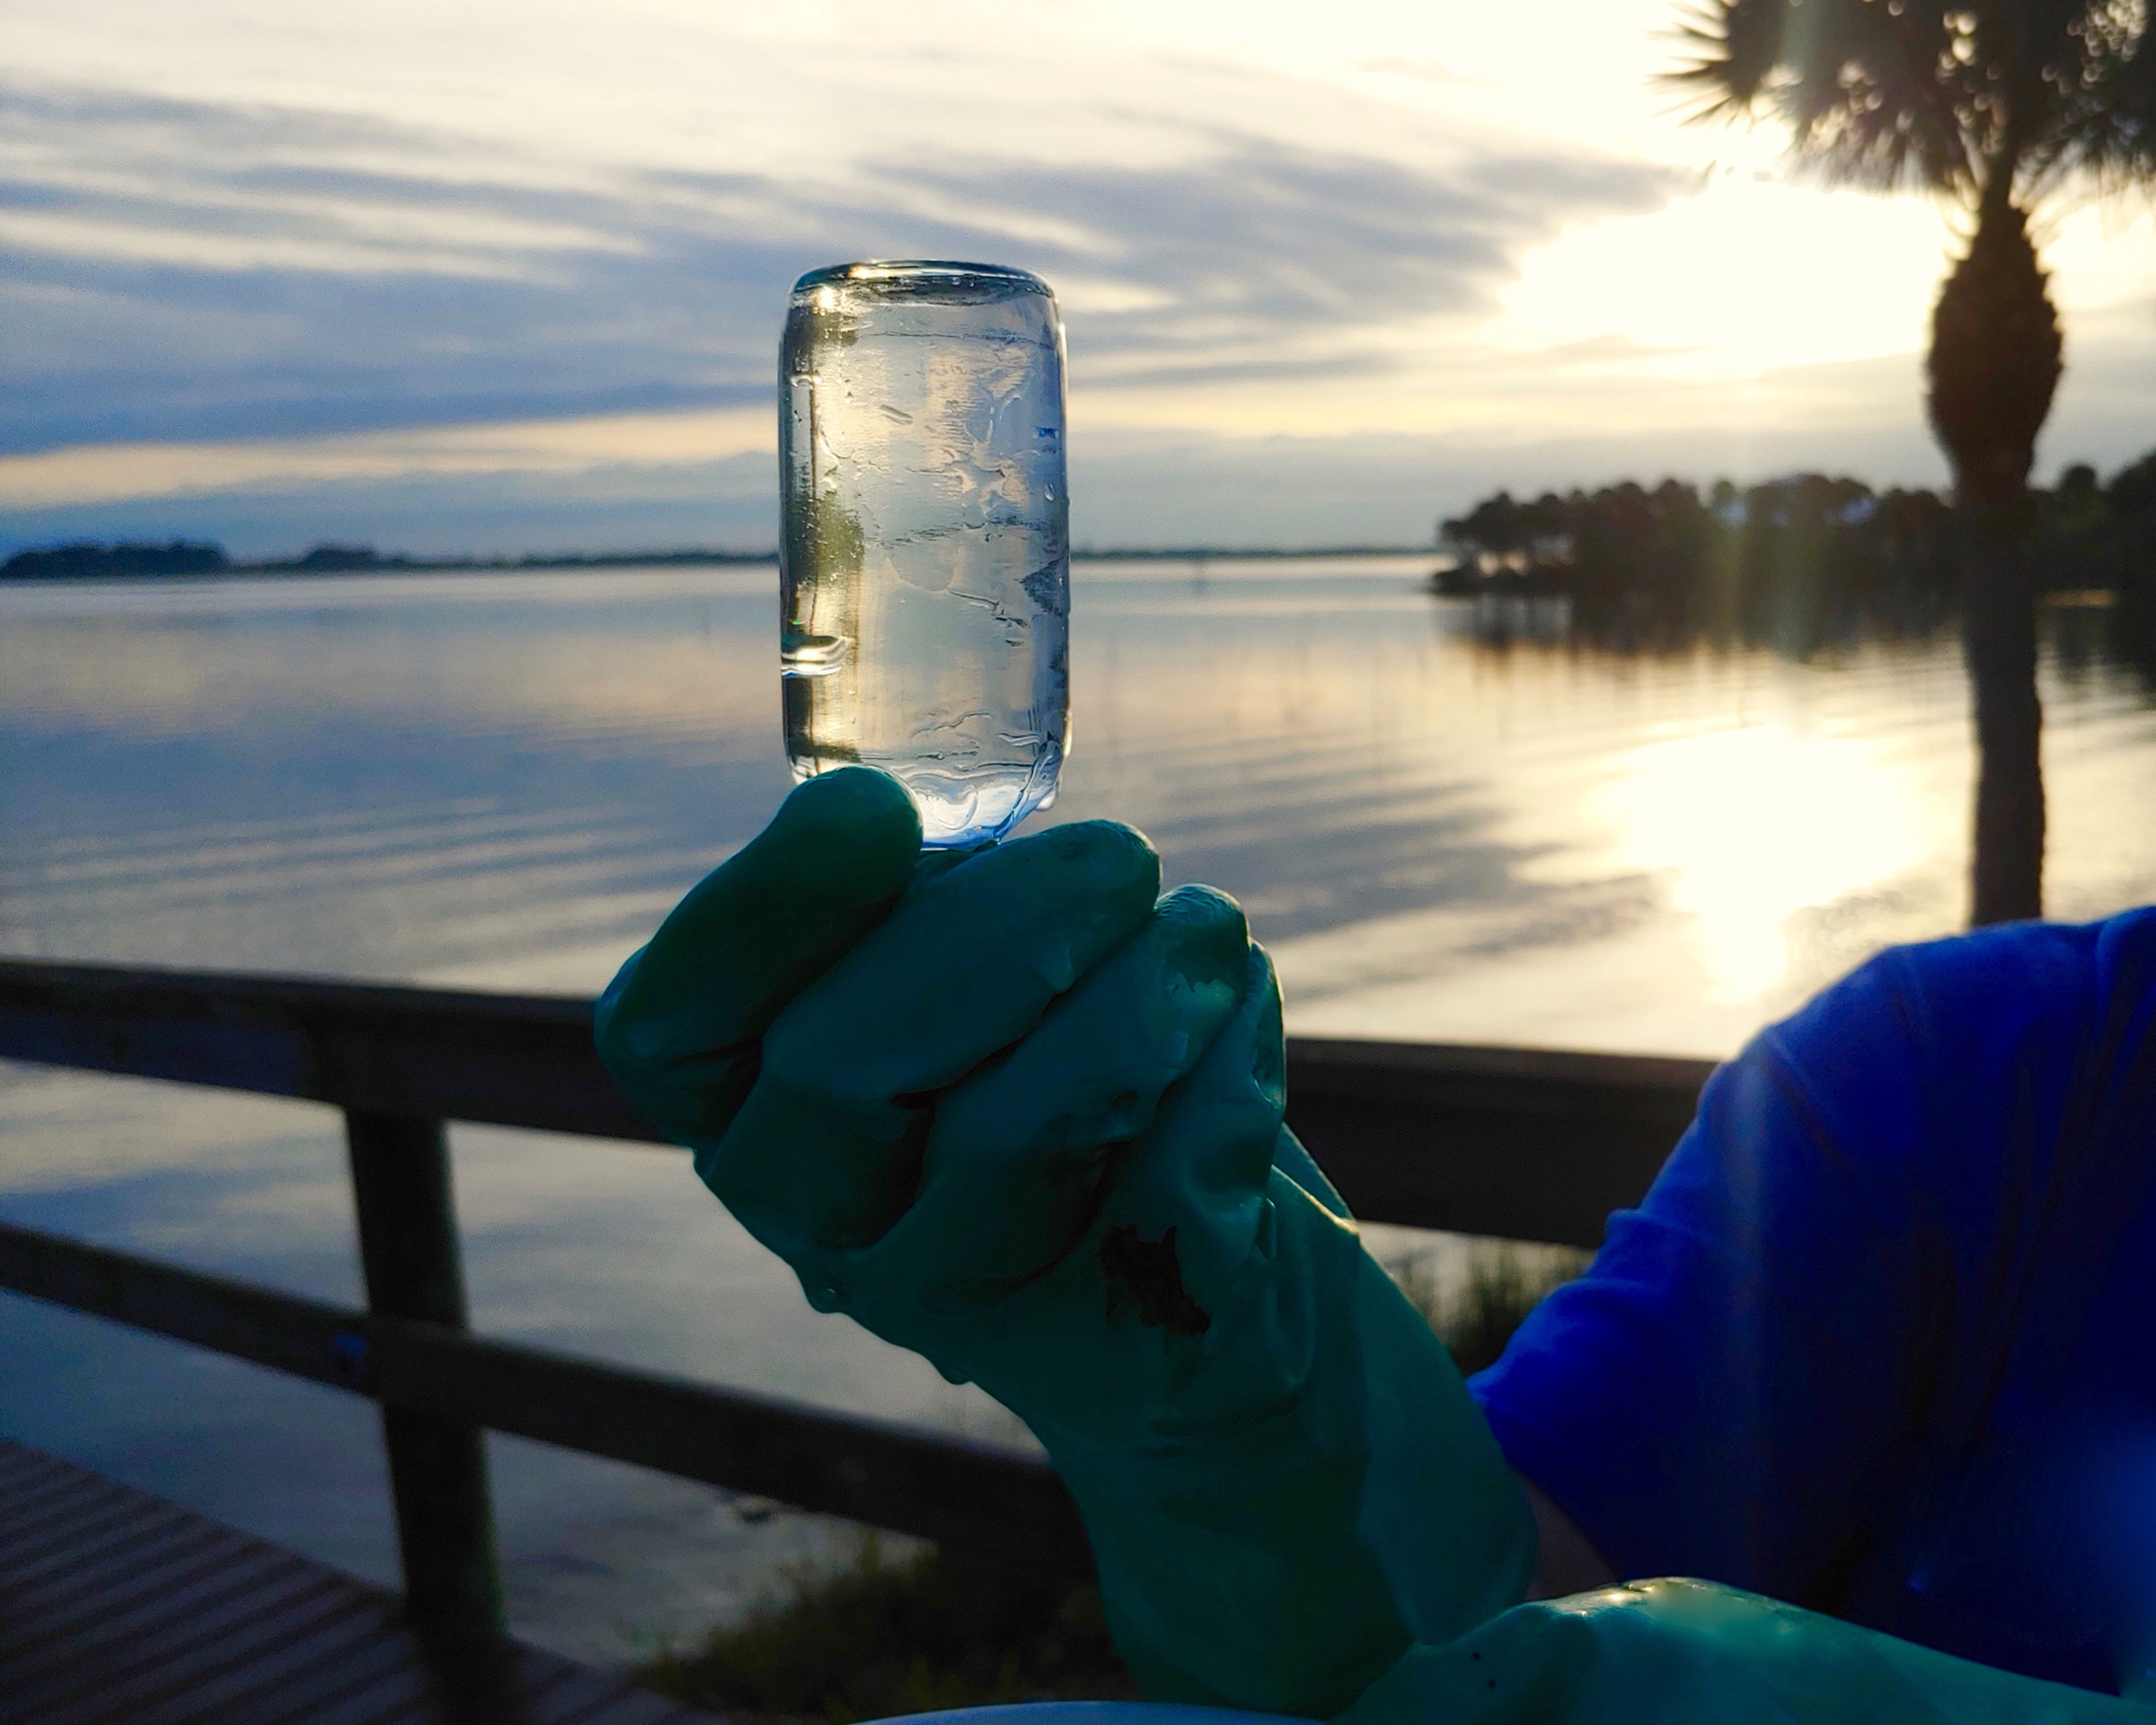 MRC's LagoonWatch: Citizen Science in Action on the Indian River Lagoon